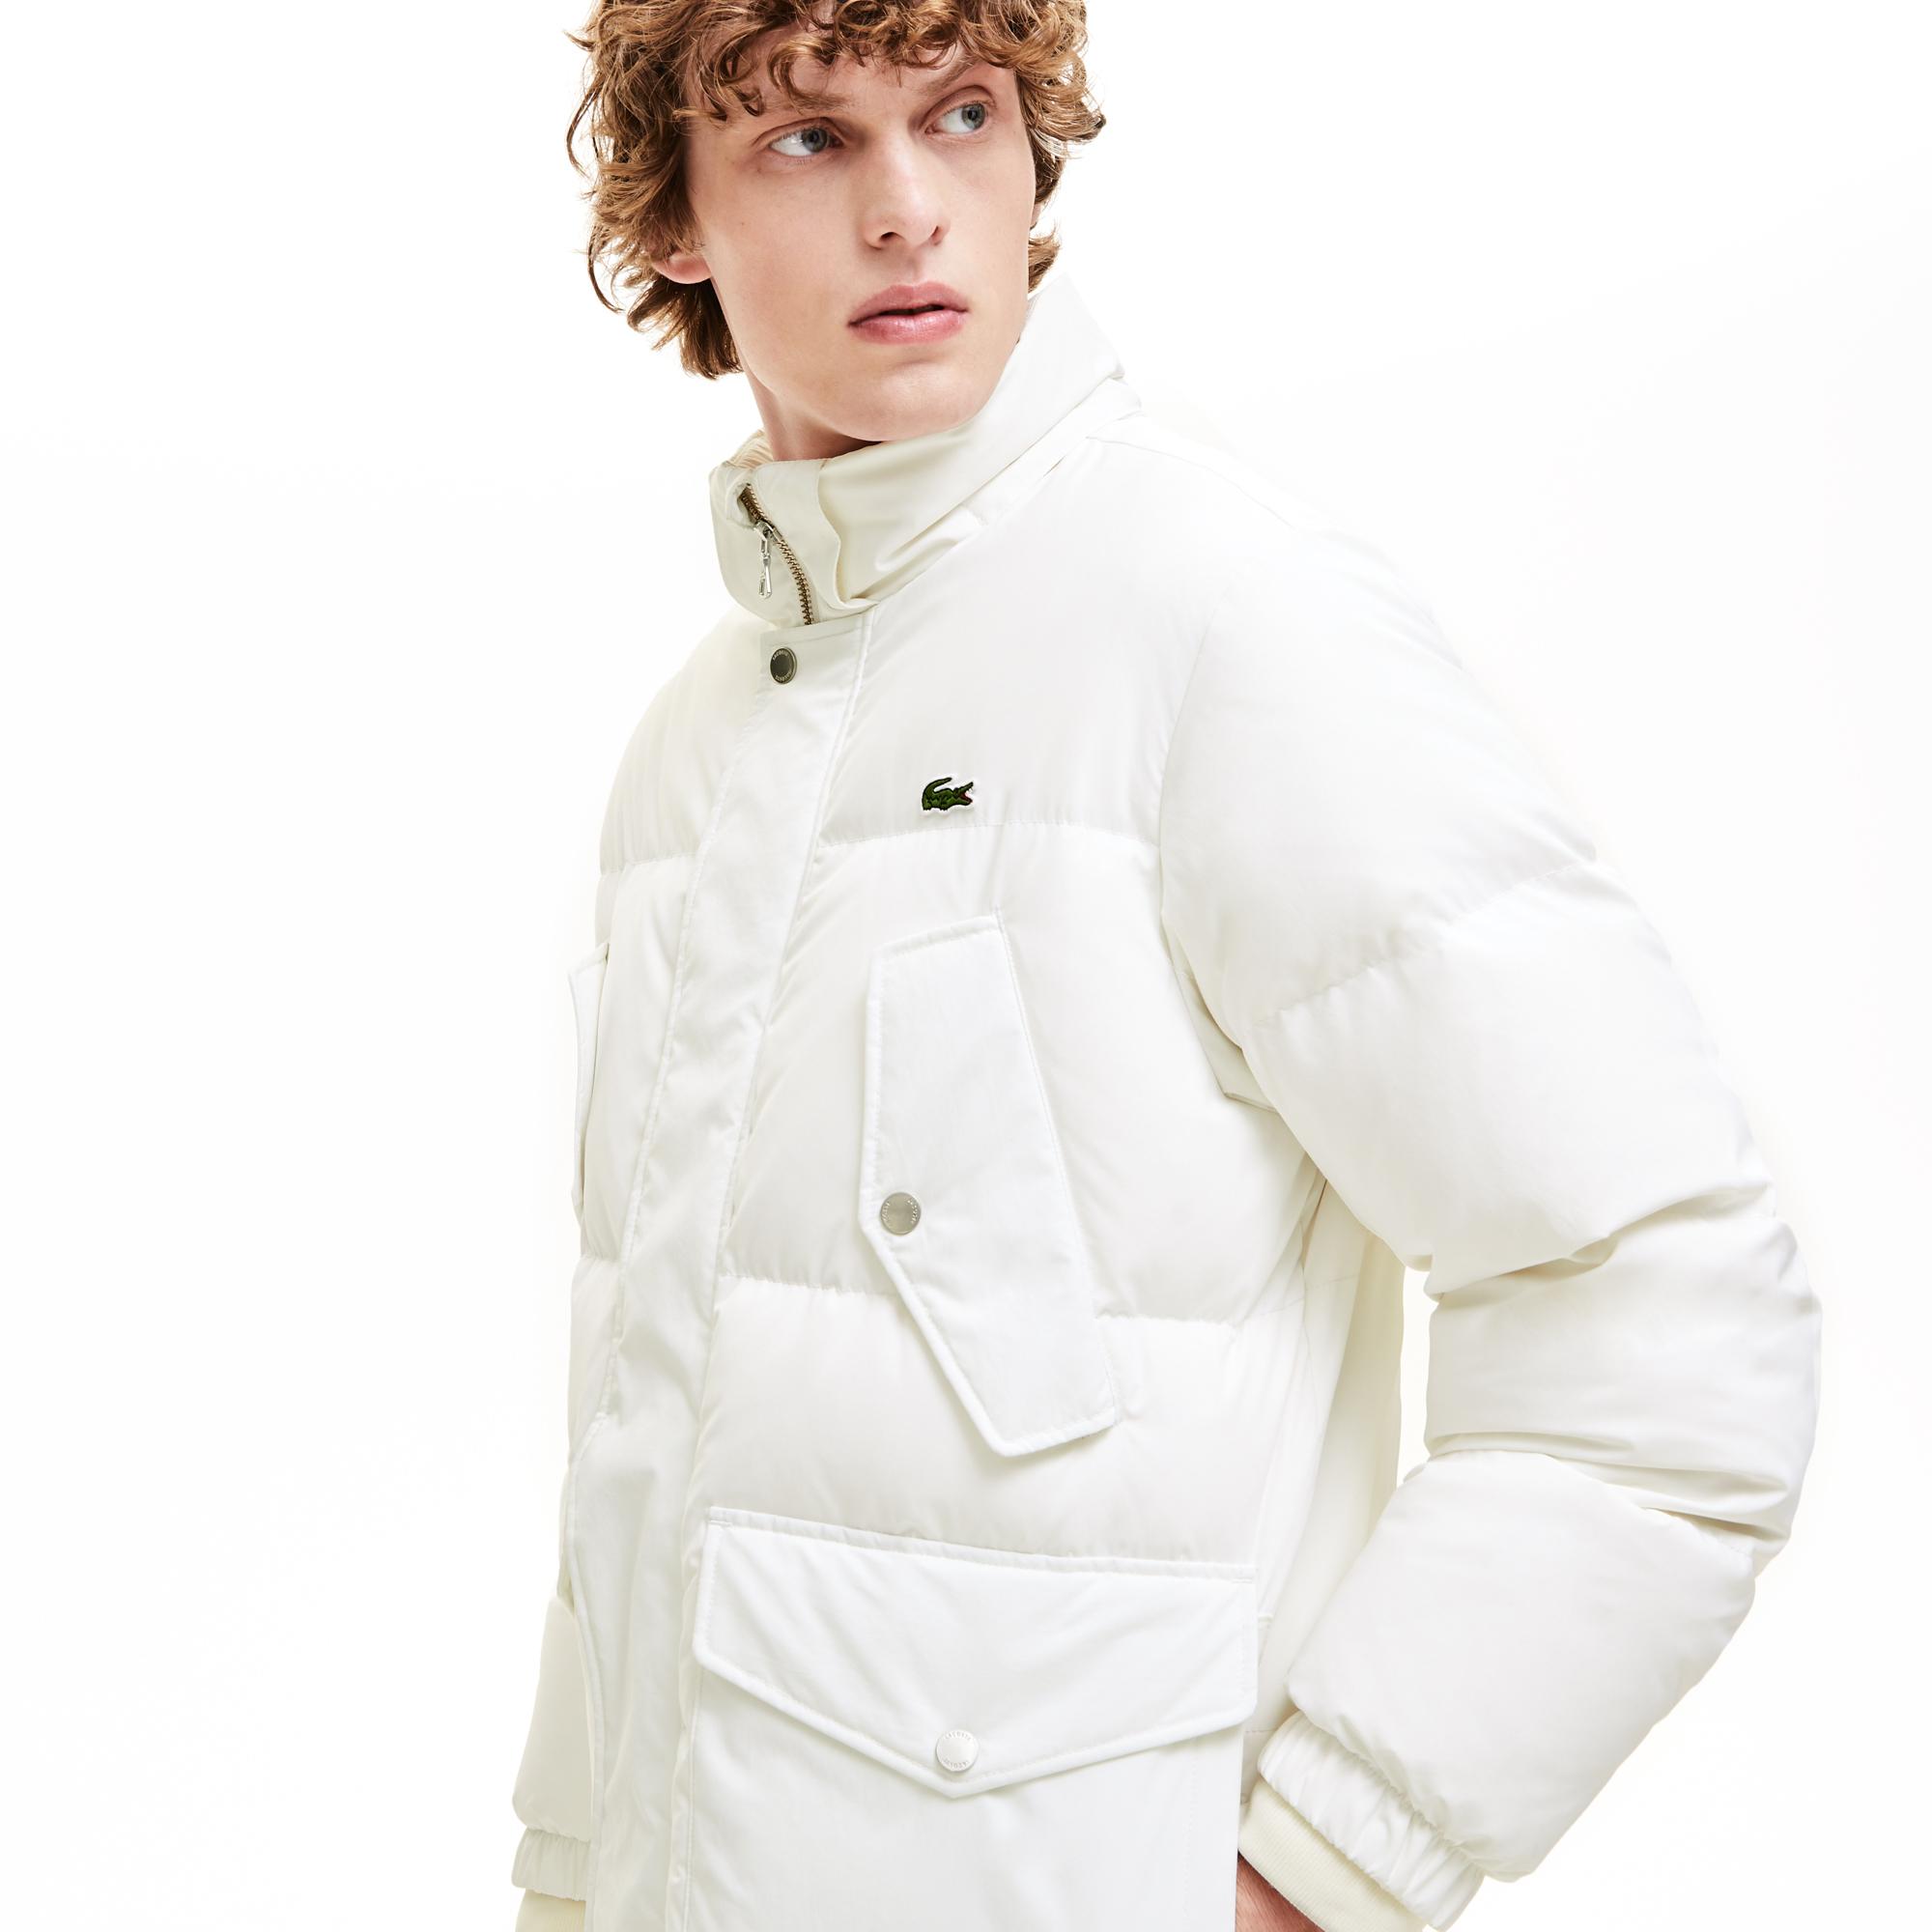 Lacoste Mens Water-Resistant Taffeta Jackets with Detachable Hood